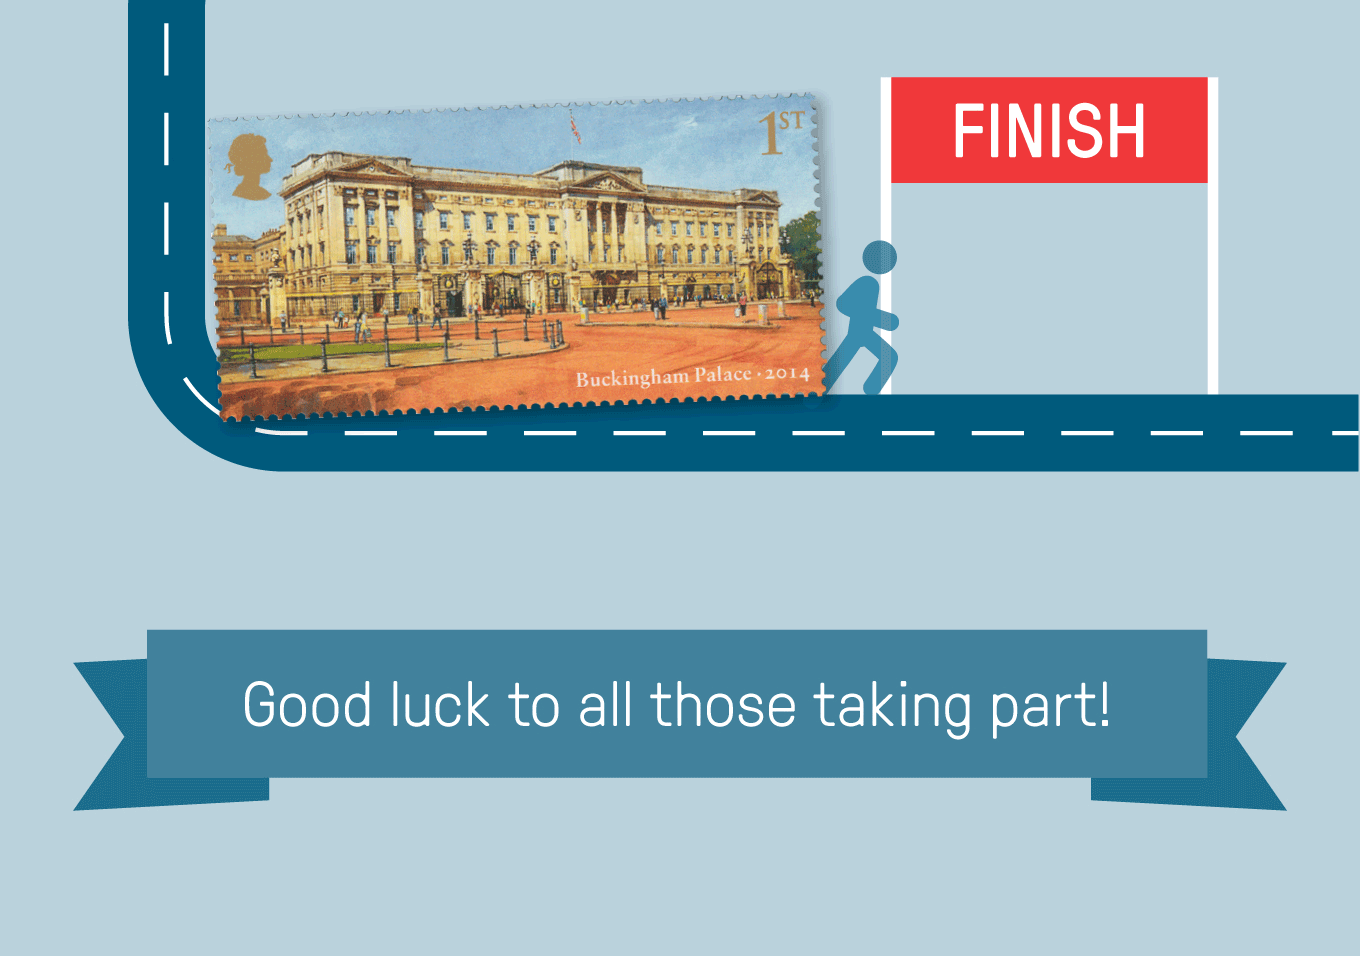 Good luck to all those taking part! Image of a stamp showing Buckingham Palace, where the marathon finishing line is.